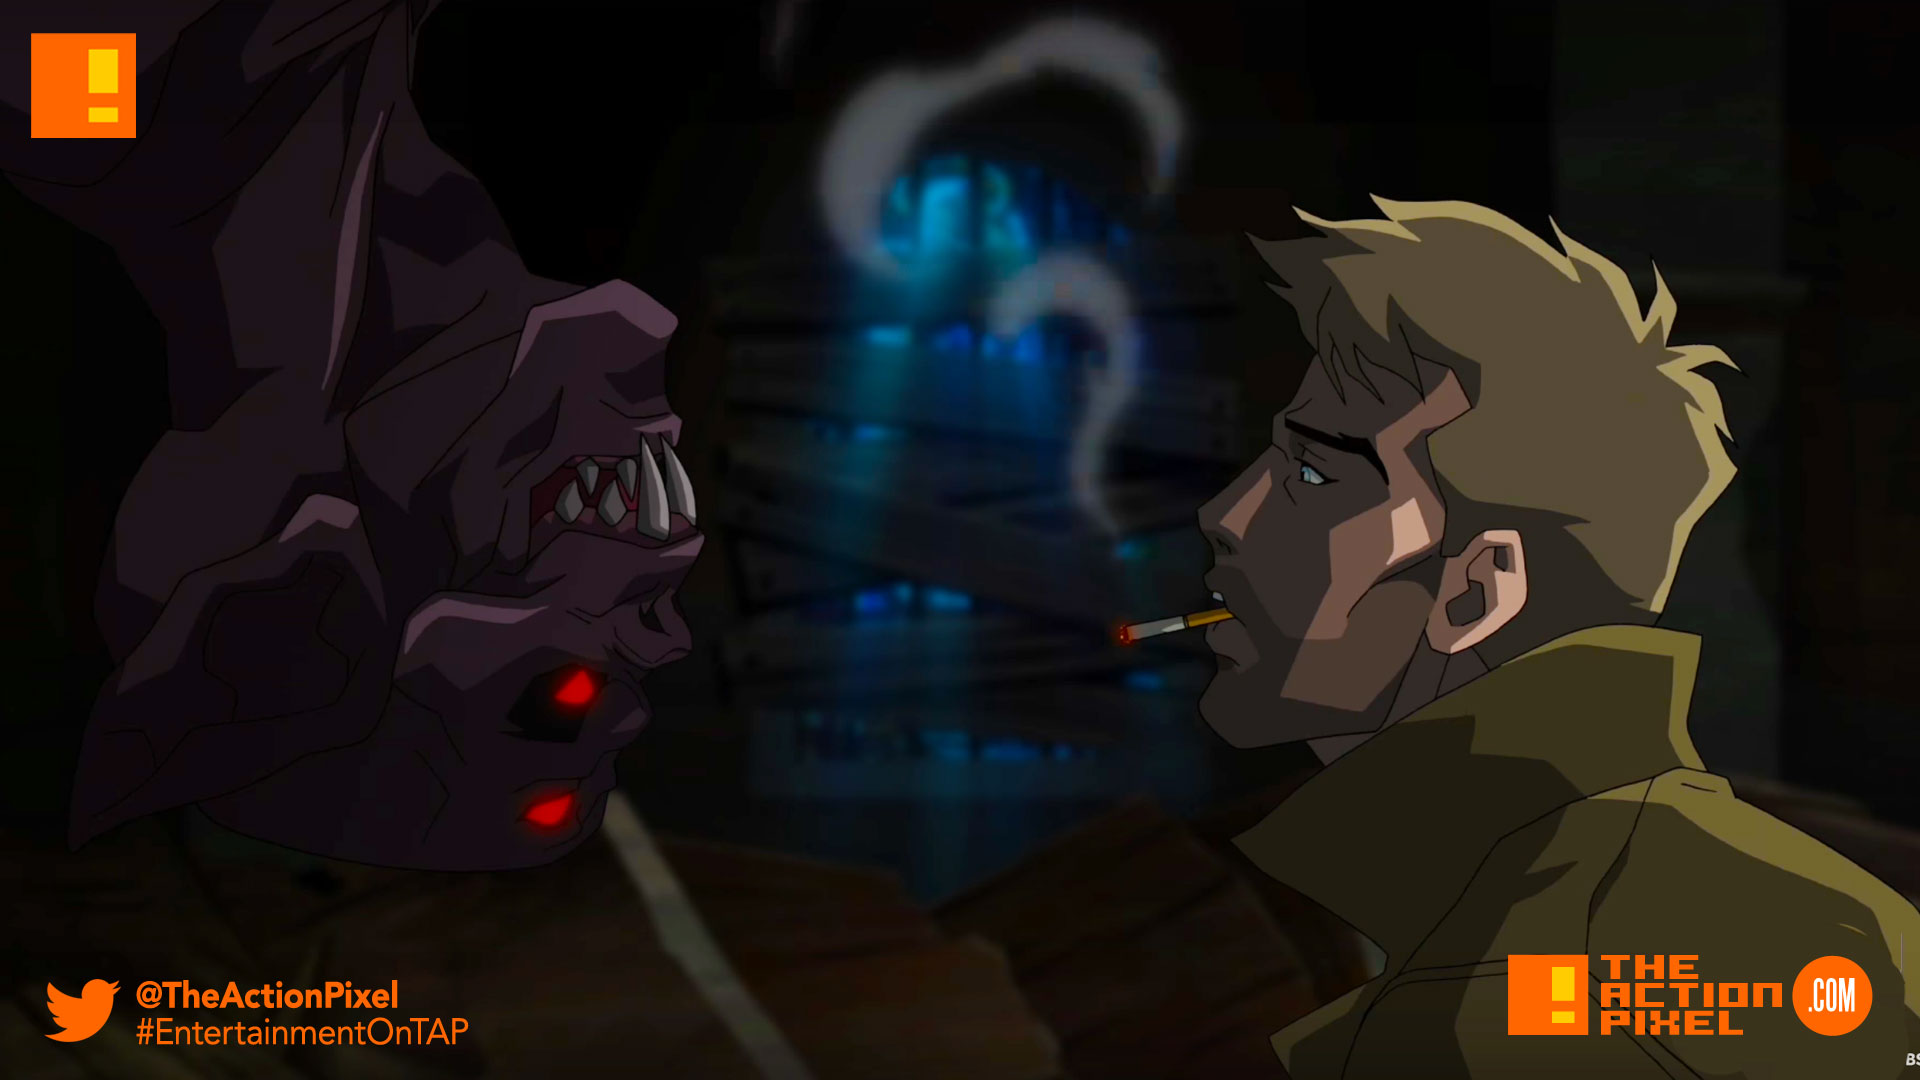 constantine, poster, the cw network, dc comics, the action pixel,matt ryan, dc comics, the cw,cw seed, trailer